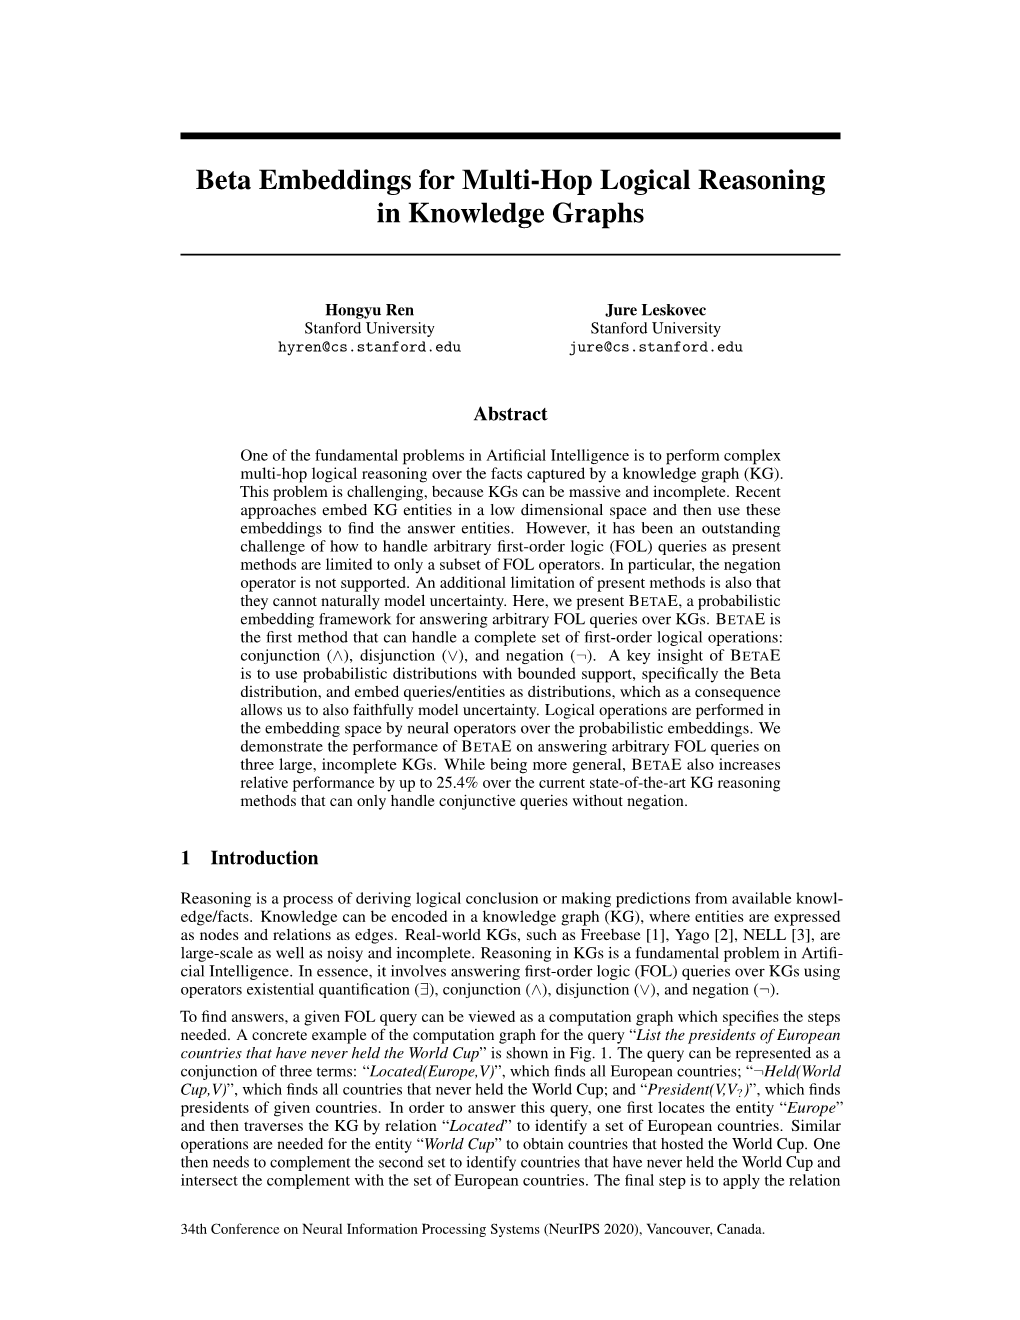 Beta Embeddings for Multi-Hop Logical Reasoning in Knowledge Graphs